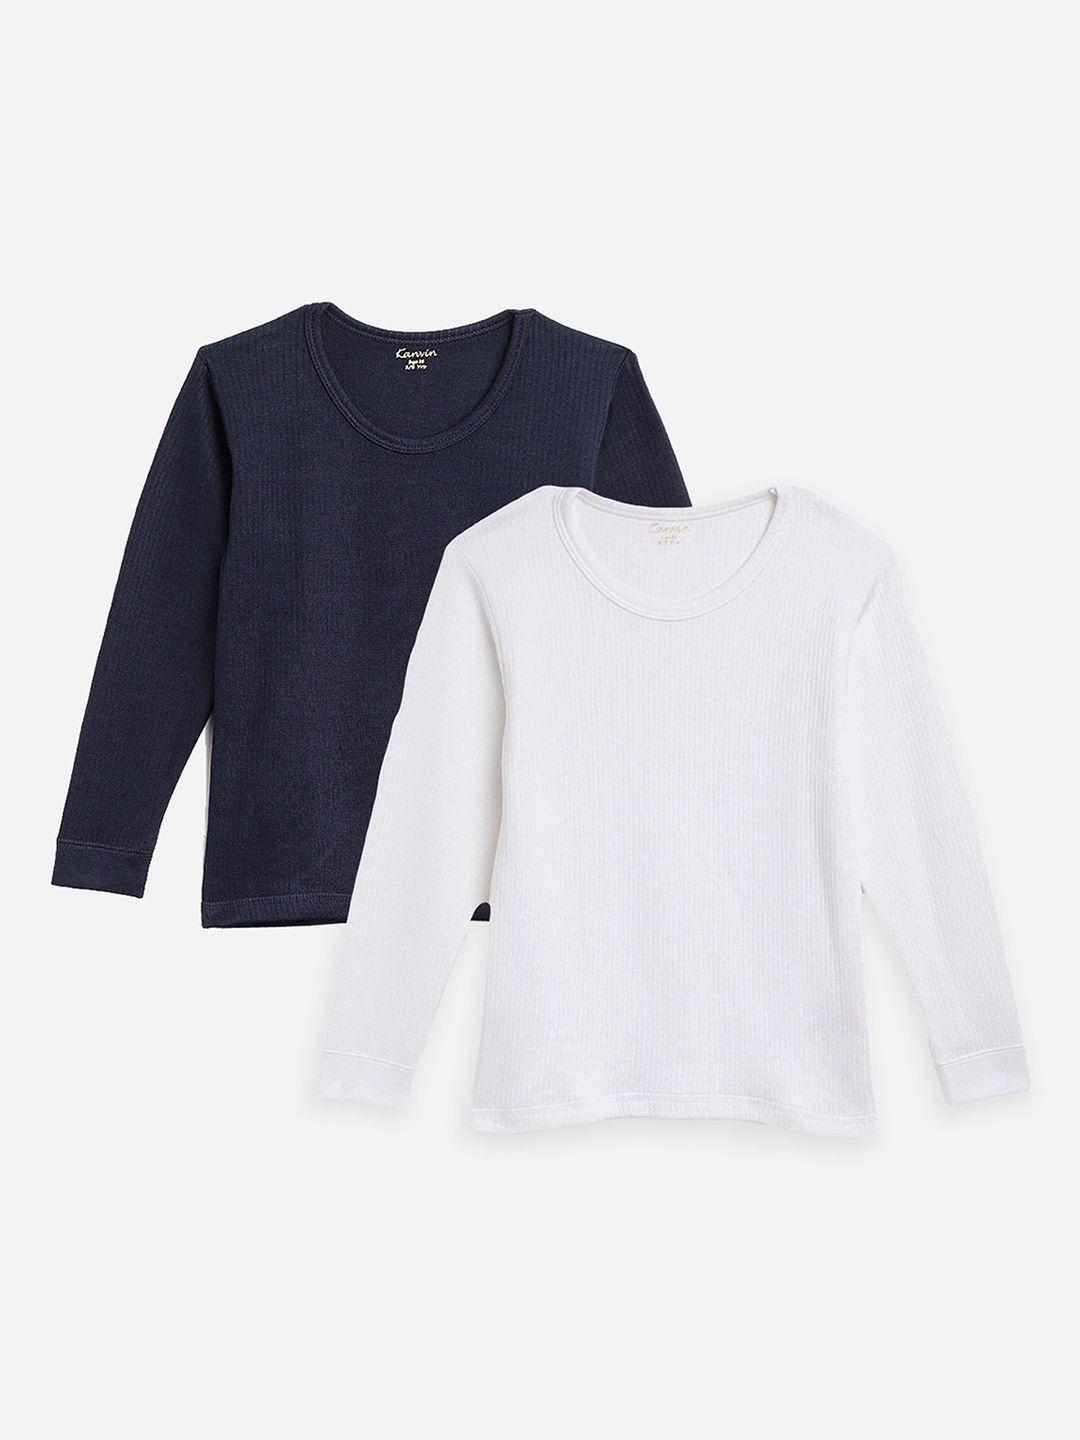 kanvin boys navy blue and white pack of 2 solid thermal tops